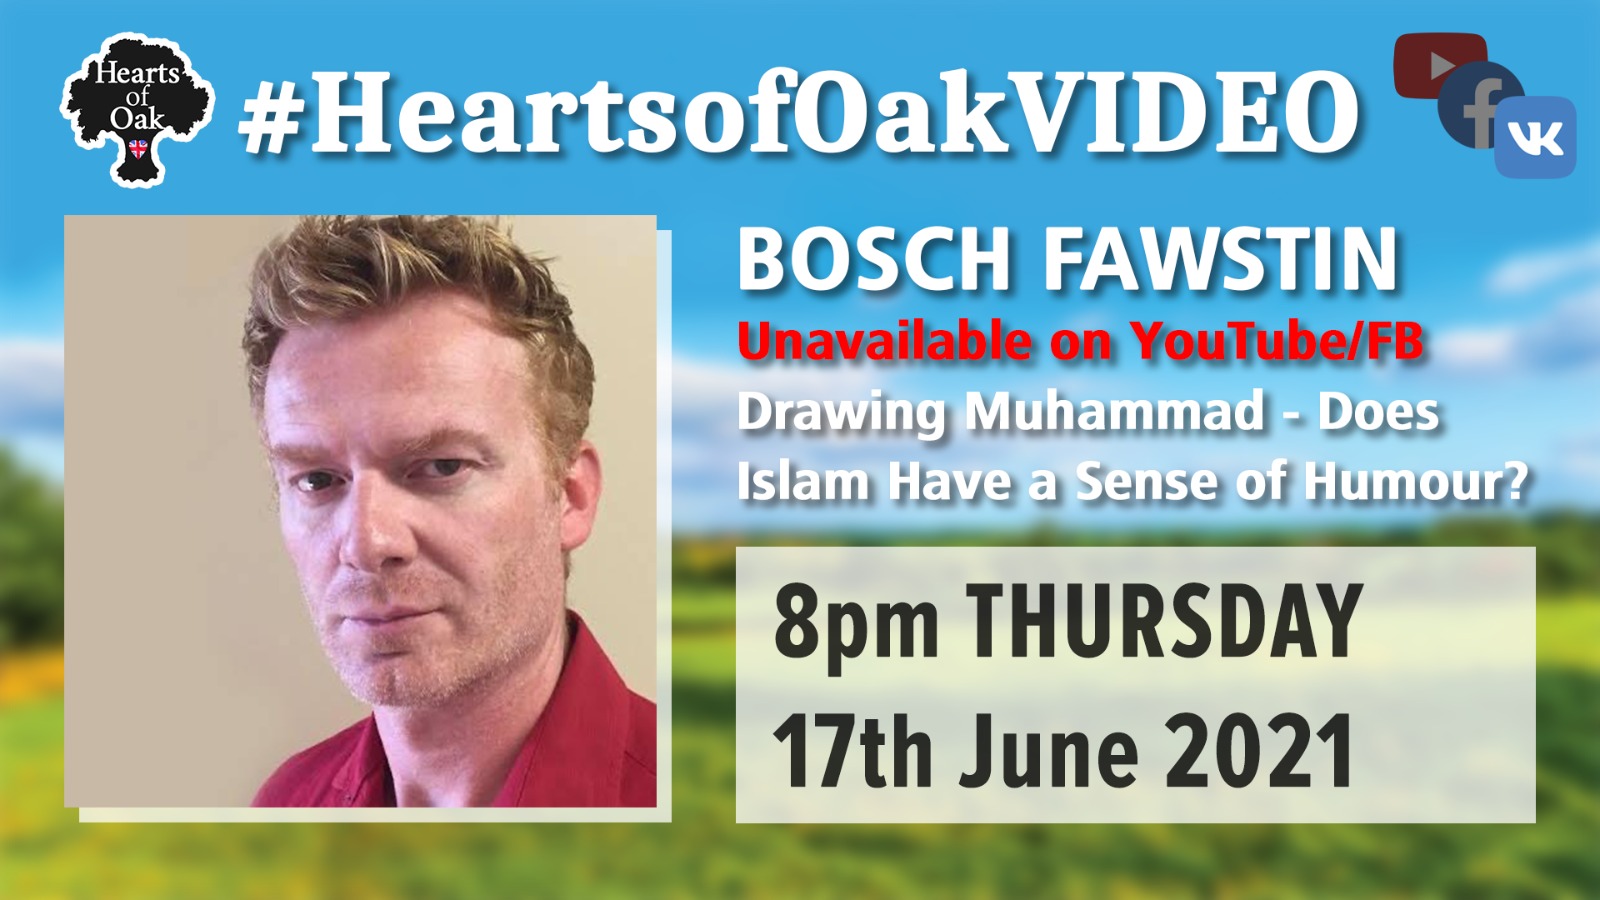 Bosch Fawstin: Drawing Muhammad - Does Islam have a sense of Humour?